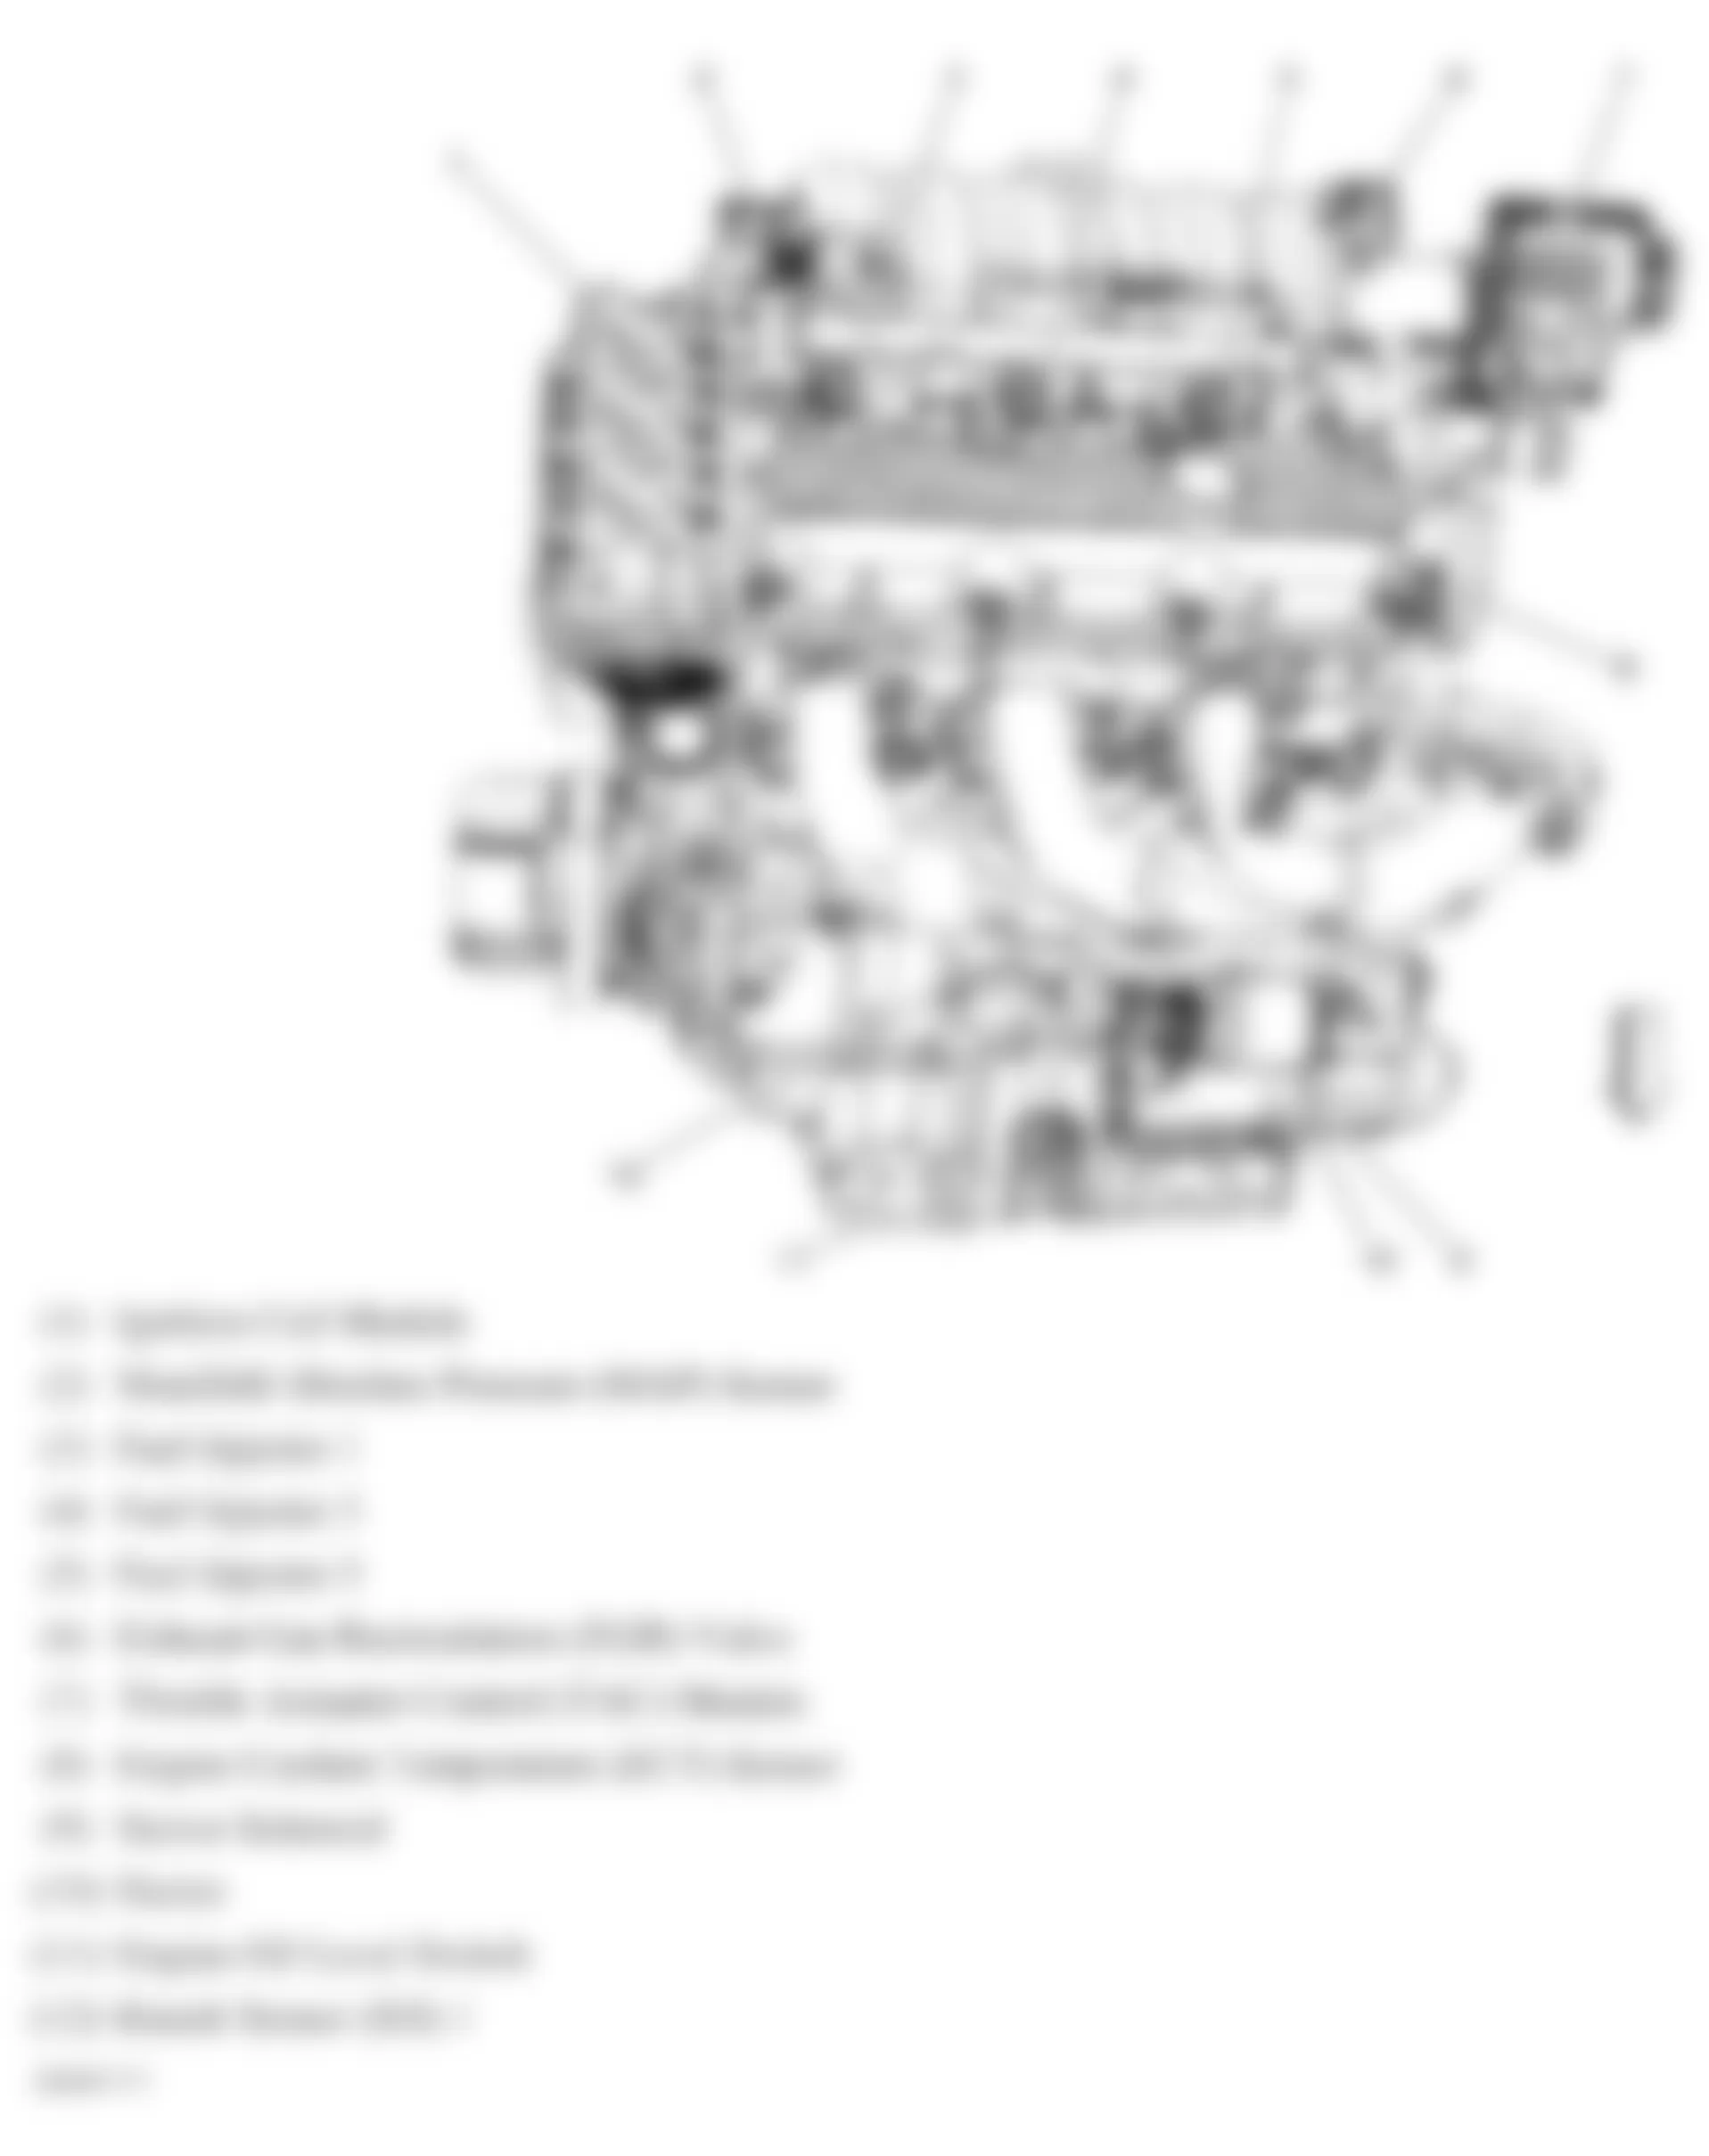 Buick LaCrosse CXL 2007 - Component Locations -  Front Of Engine (3.8L)